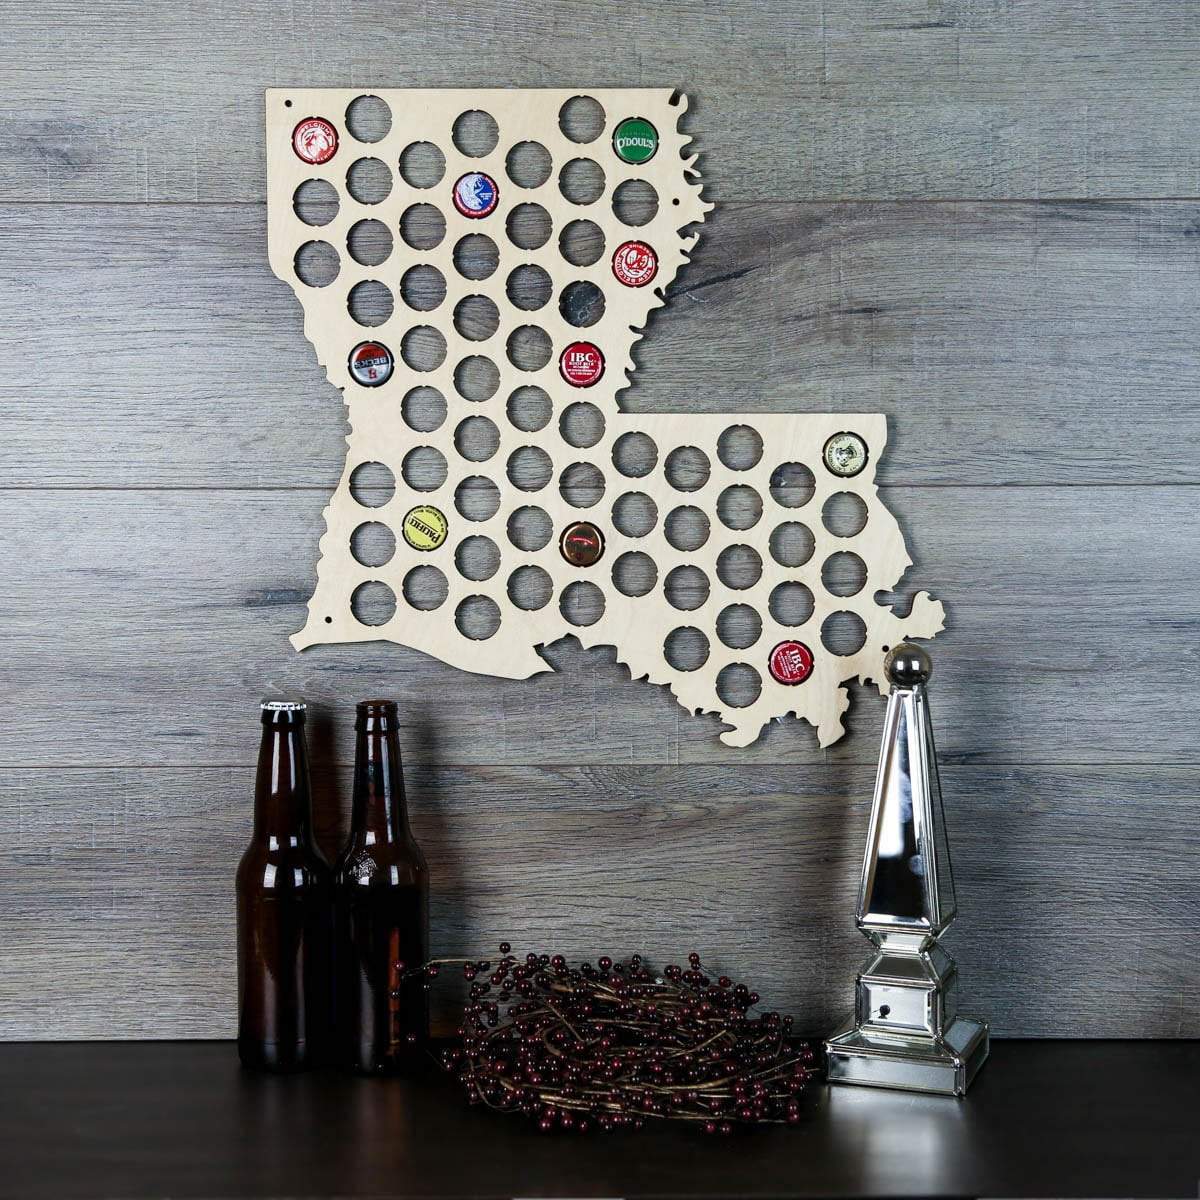 Torched Products Beer Bottle Cap Holder Louisiana Beer Cap Map (777557114997)